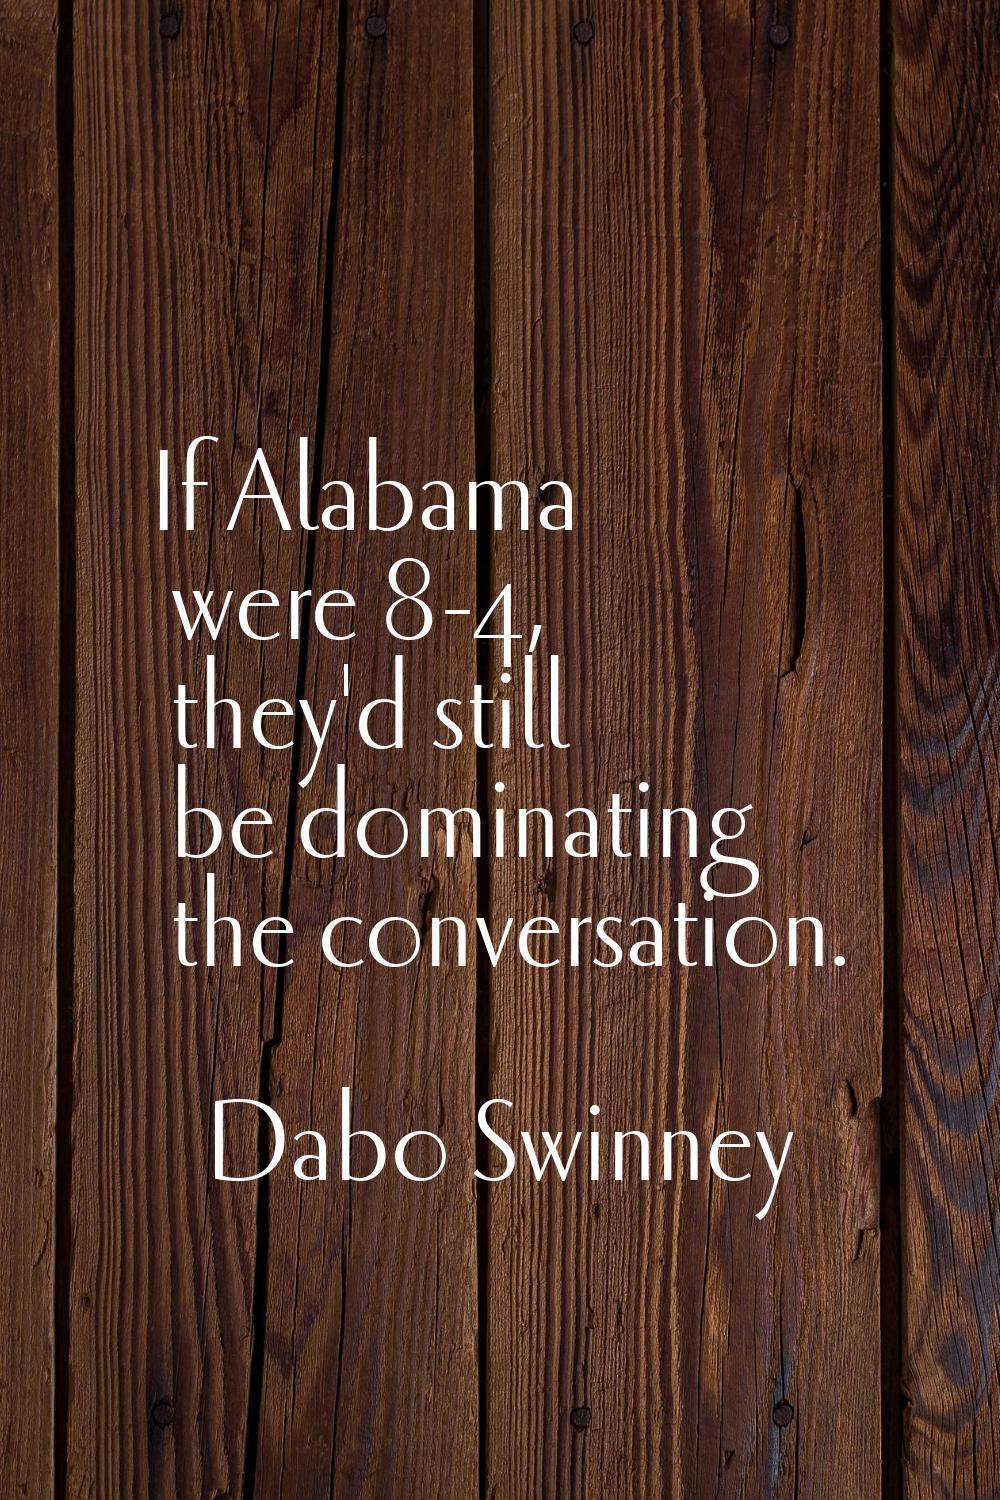 If Alabama were 8-4, they'd still be dominating the conversation.